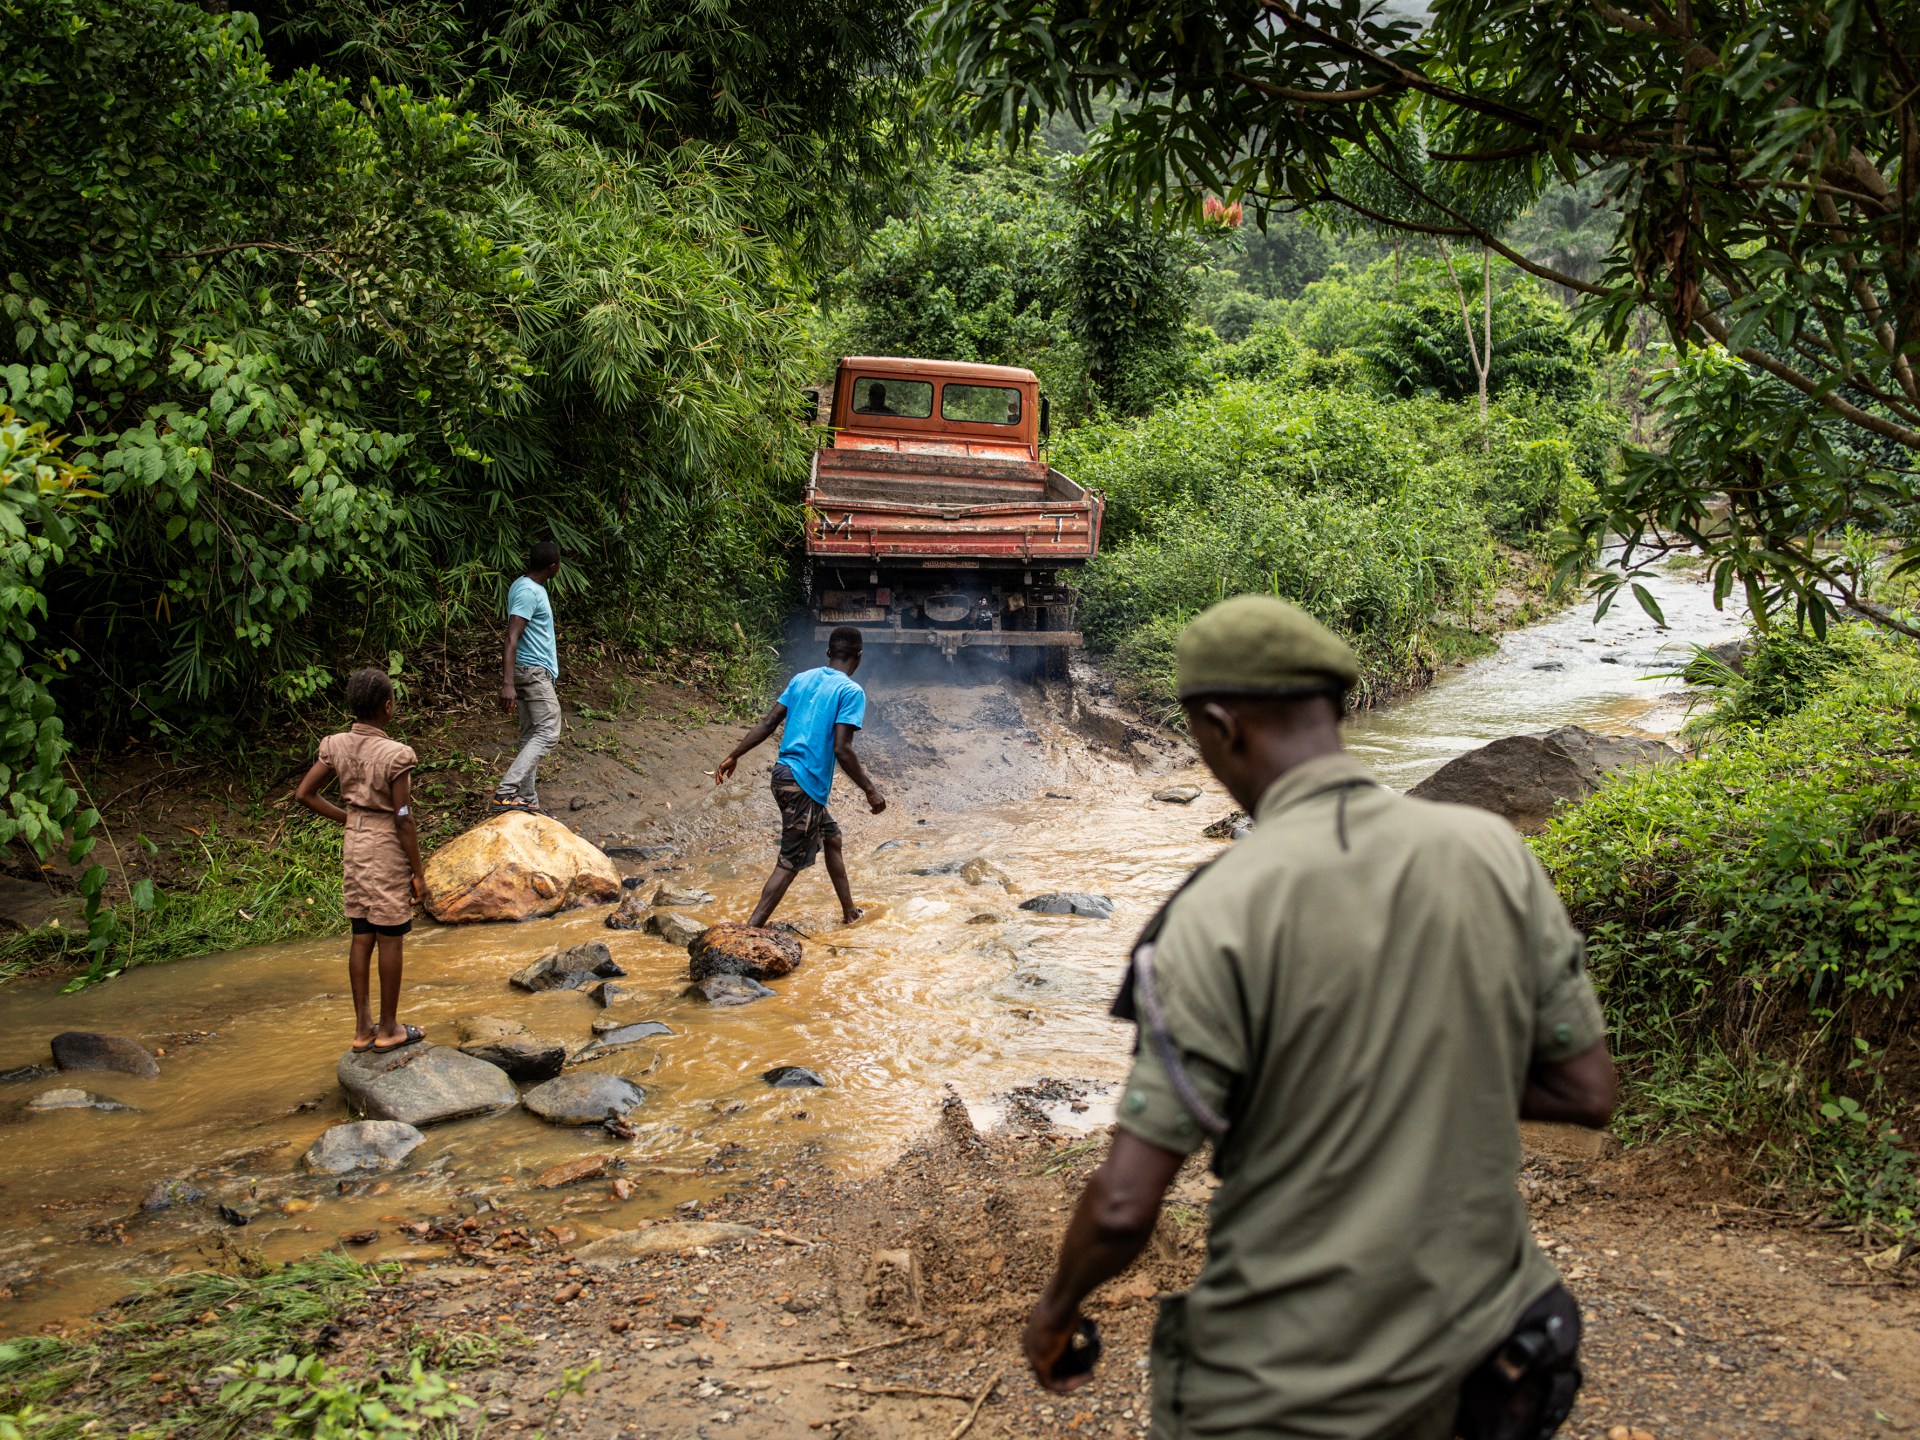 Photos: Sierra Leone rangers face a tough fight against deforestation | Poverty and Development